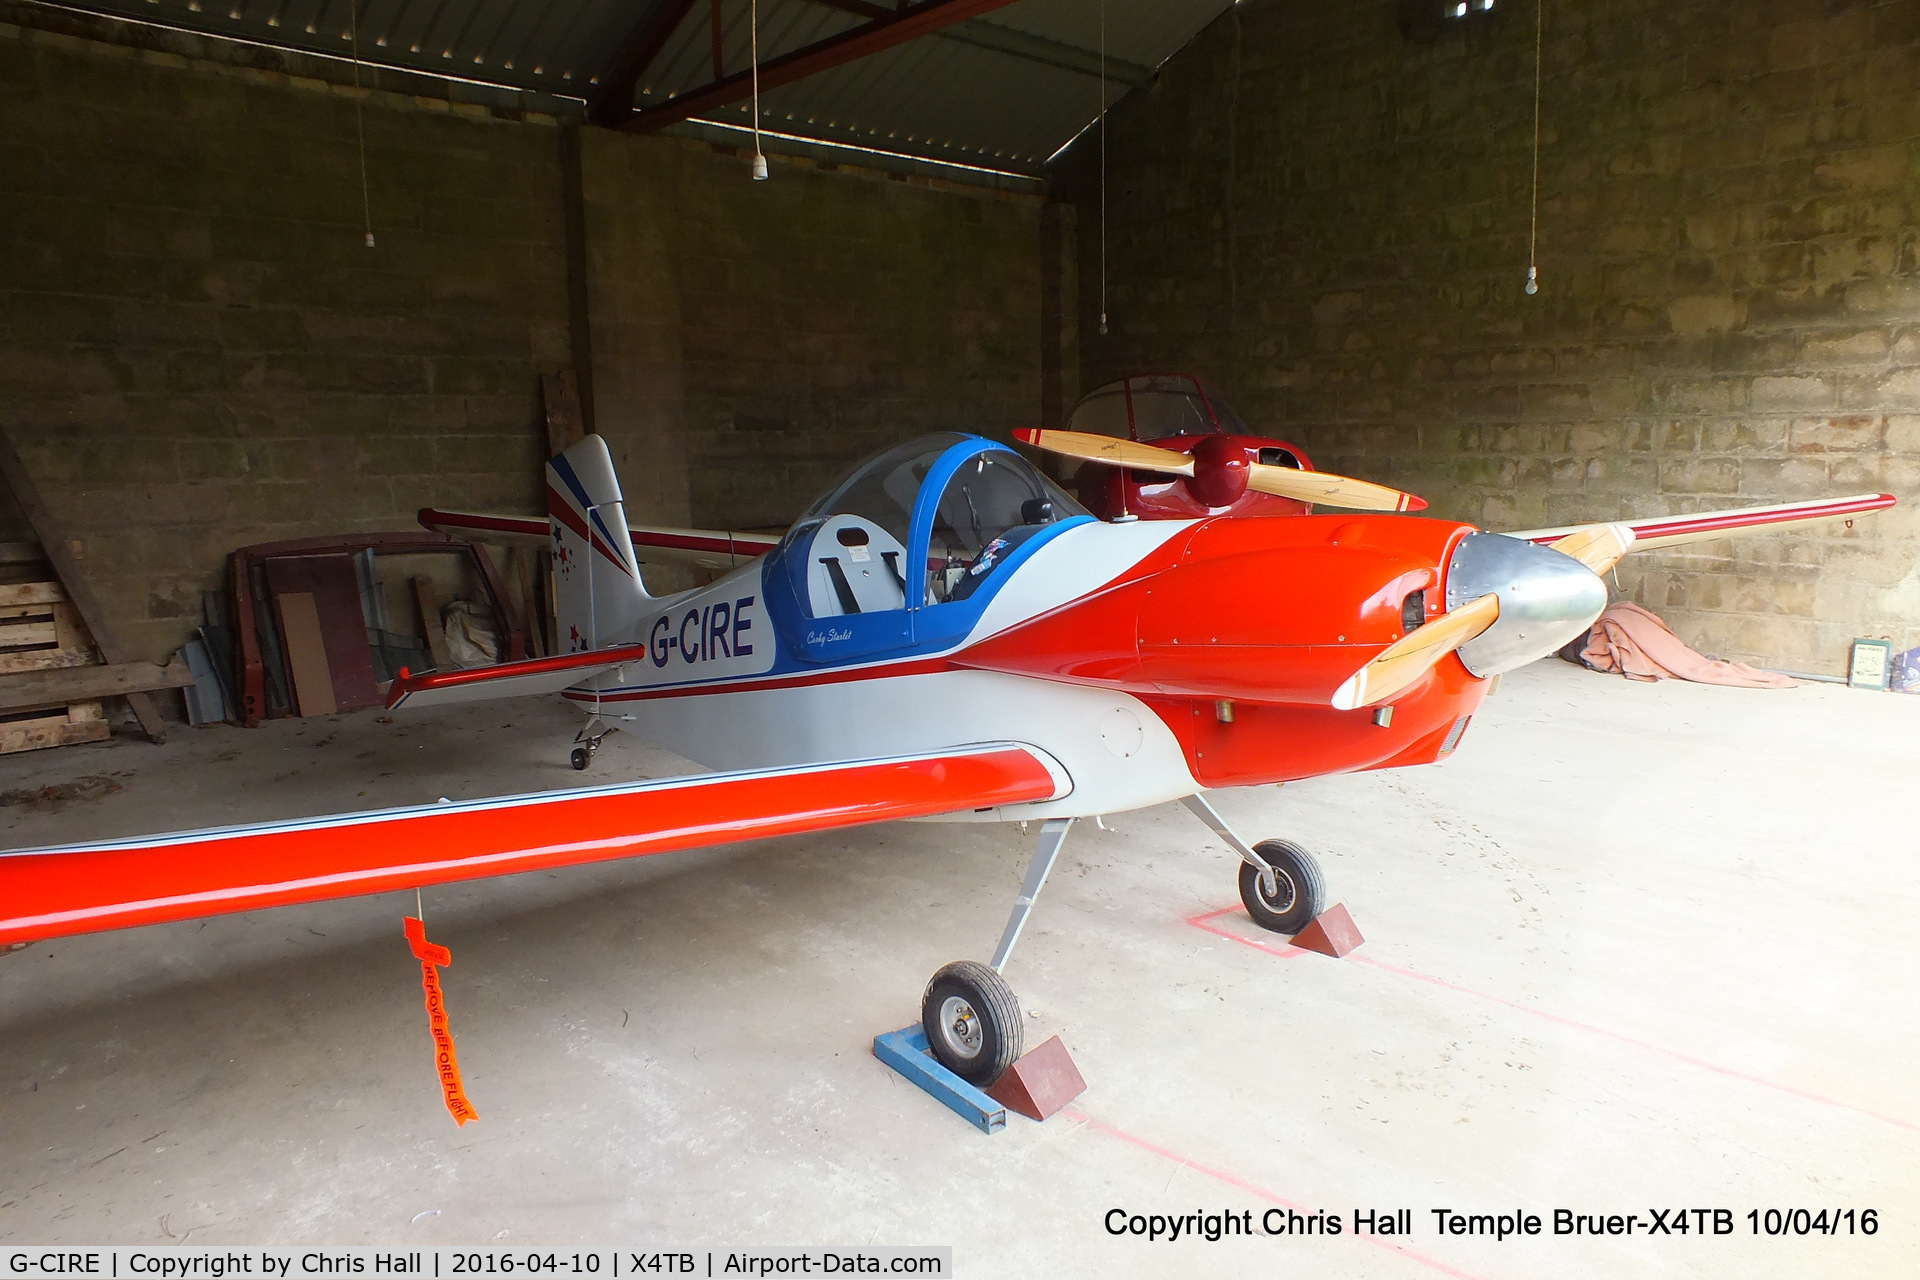 G-CIRE, 2015 Corby CJ-1 Starlet C/N LAA 134-14806, at Temple Bruer